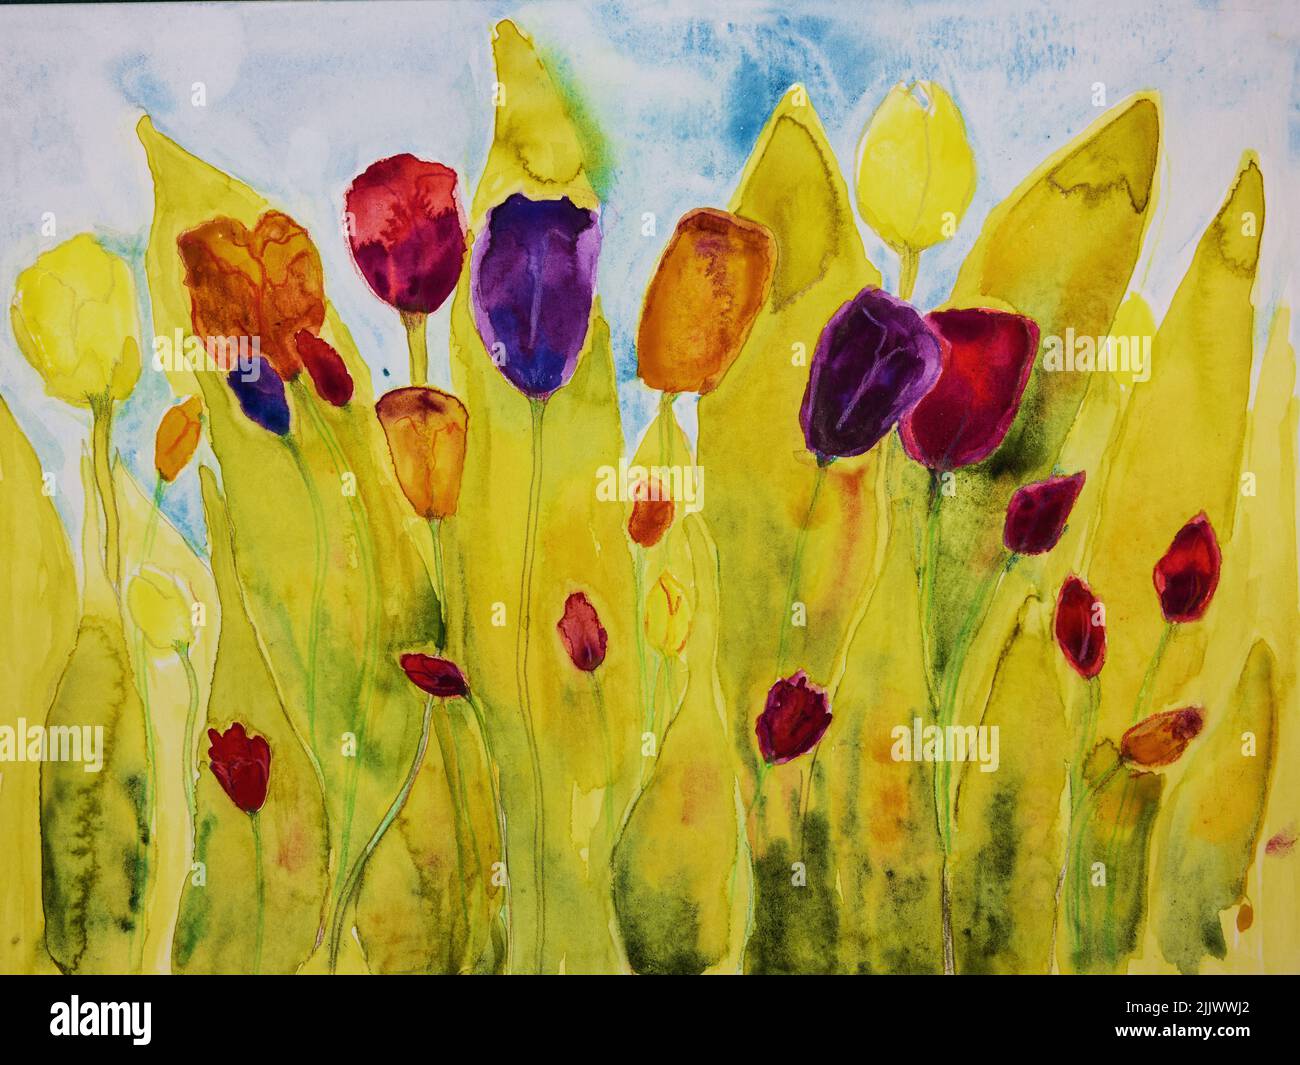 Vibrant tulips with multiple colors. The dabbing technique near the edges gives a soft focus effect due to the altered surface roughness of the paper. Stock Photo